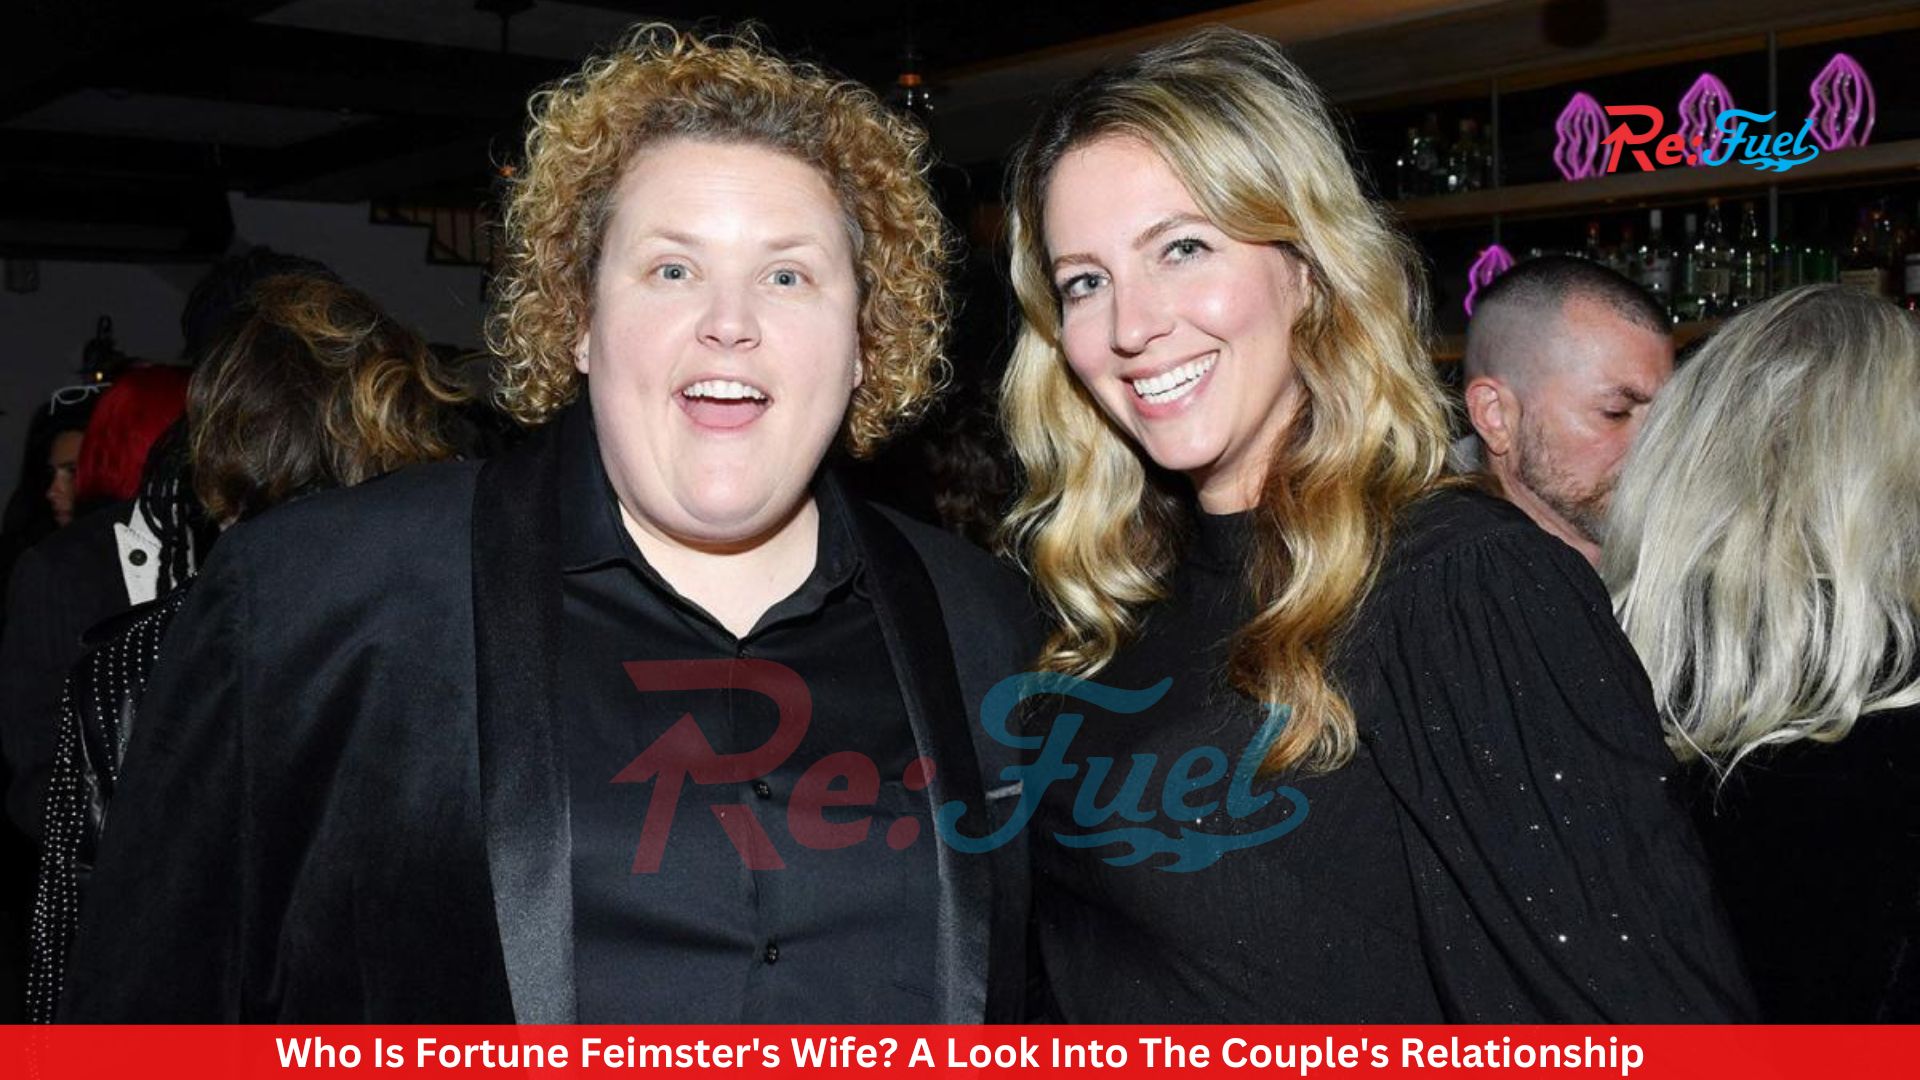 Who Is Fortune Feimster's Wife? A Look Into The Couple's Relationship